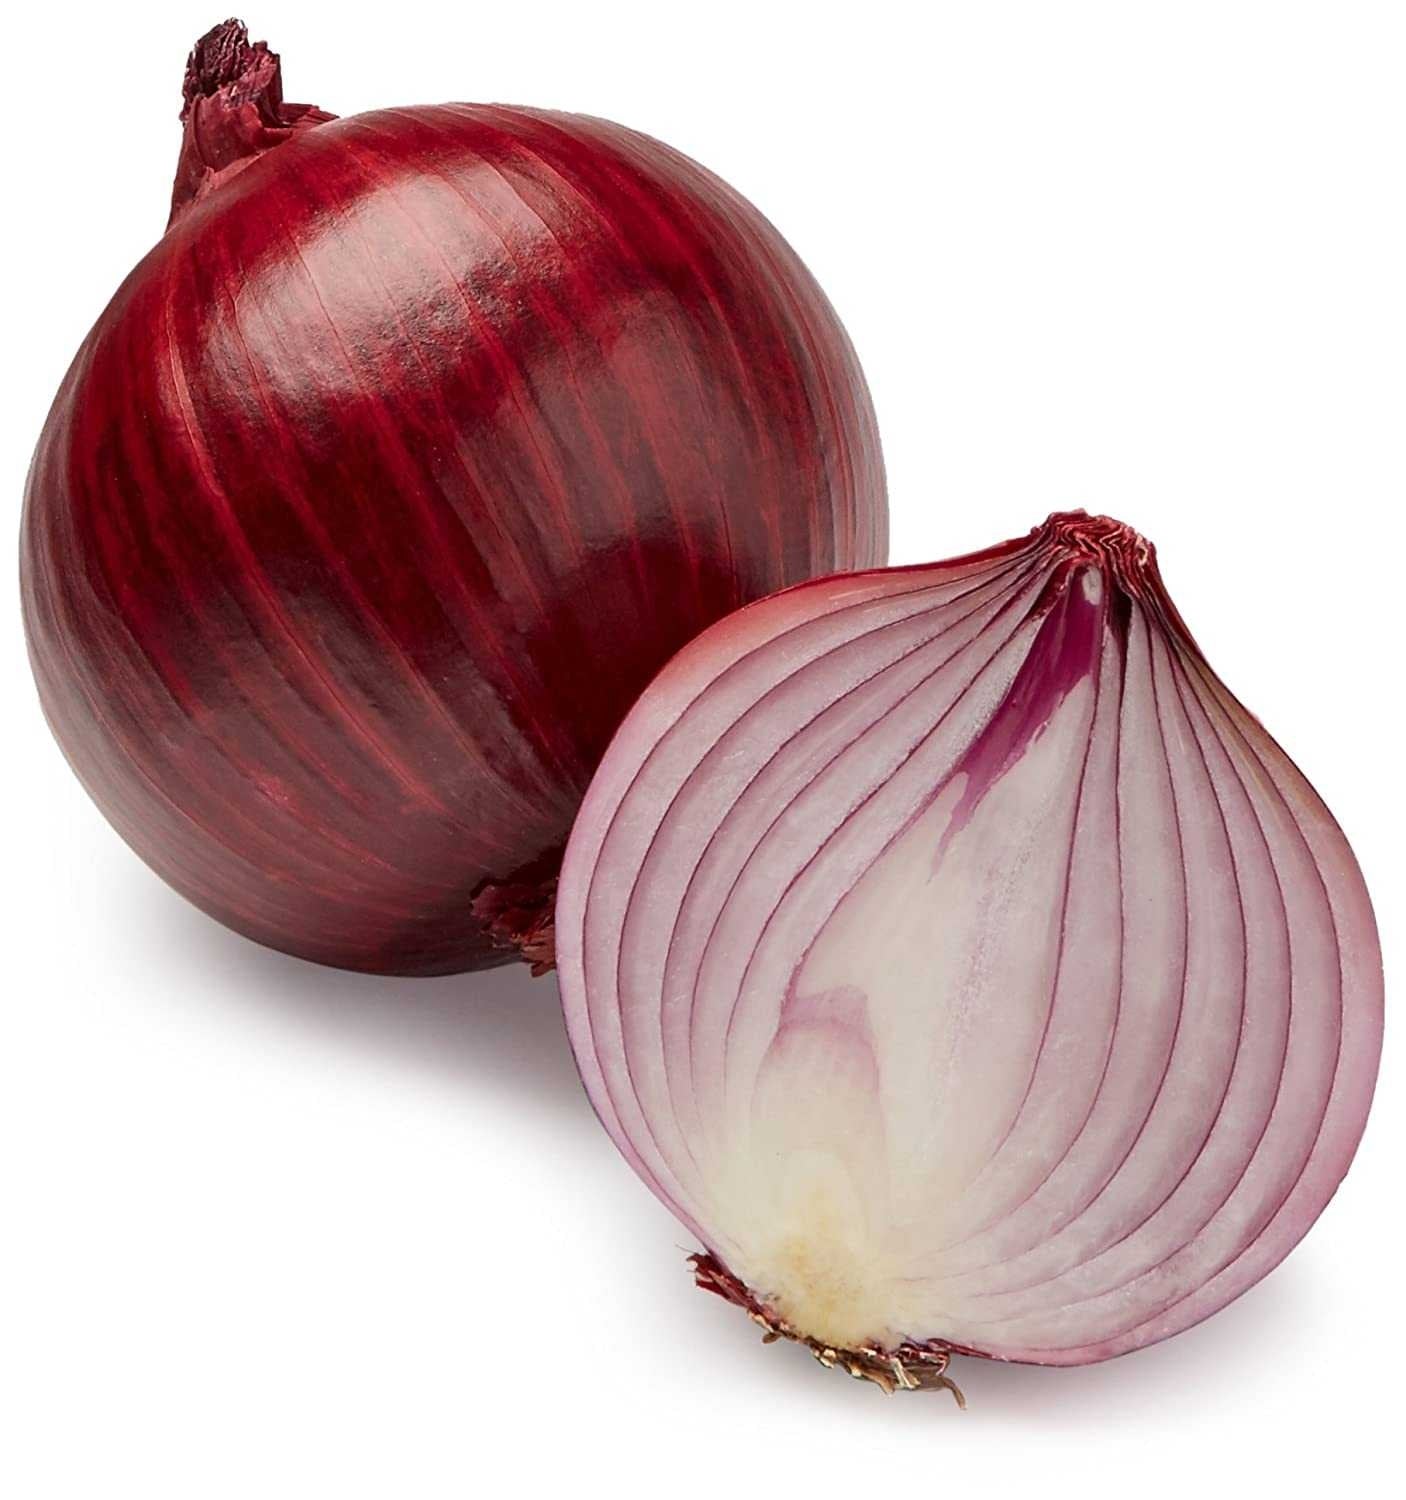 Fresh Red onion (Imported) (500grams) "SBMA ONLY"